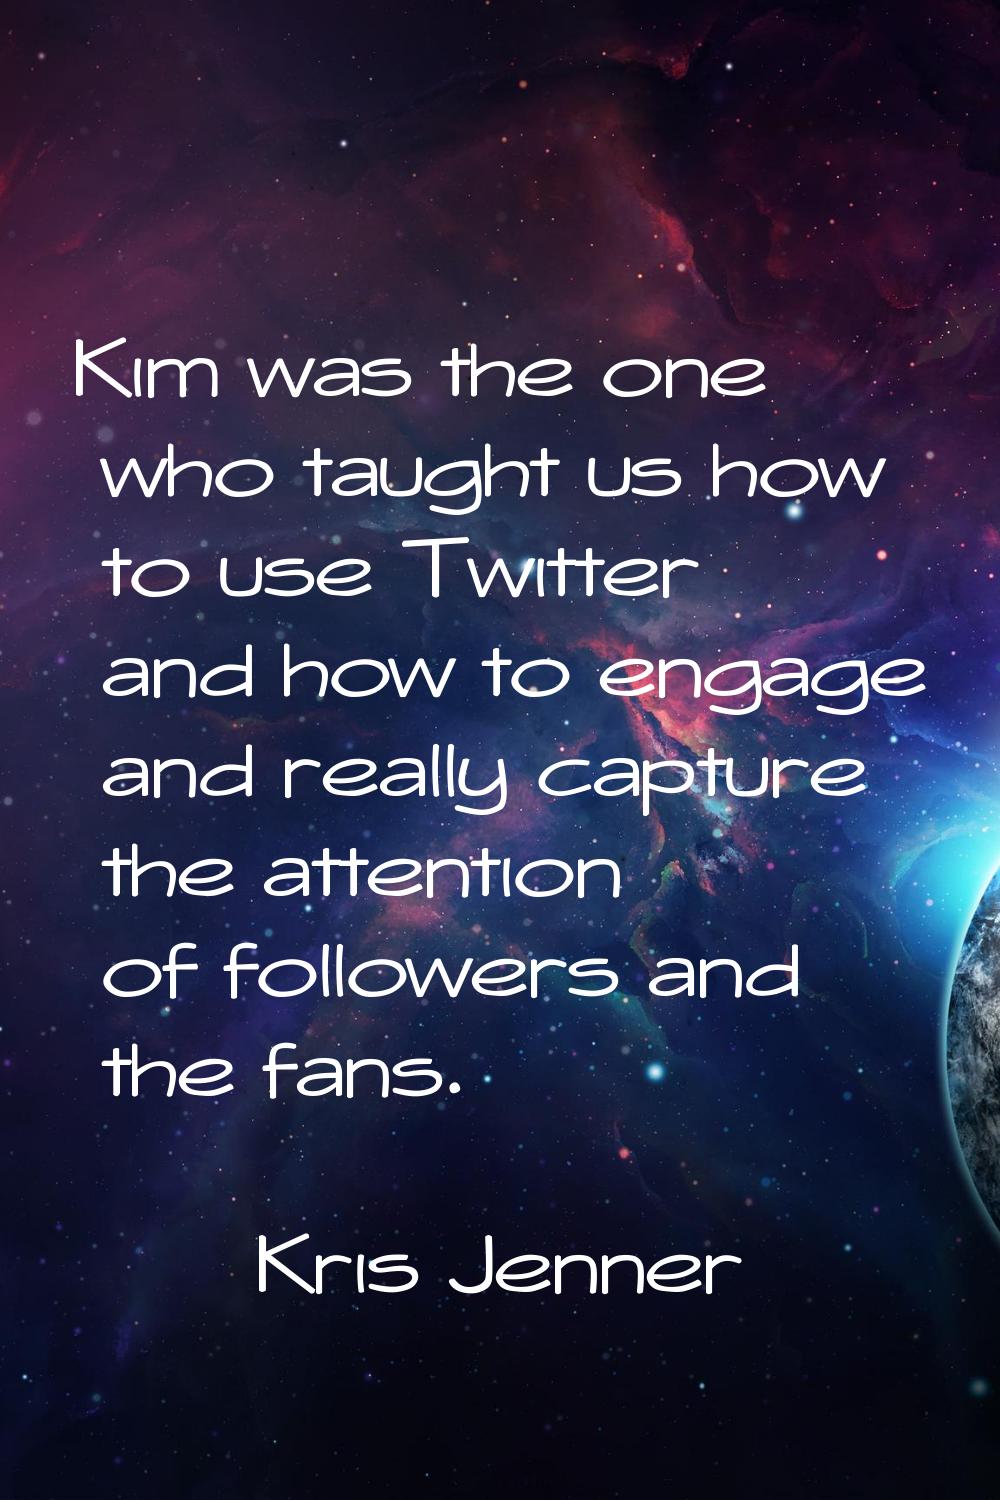 Kim was the one who taught us how to use Twitter and how to engage and really capture the attention